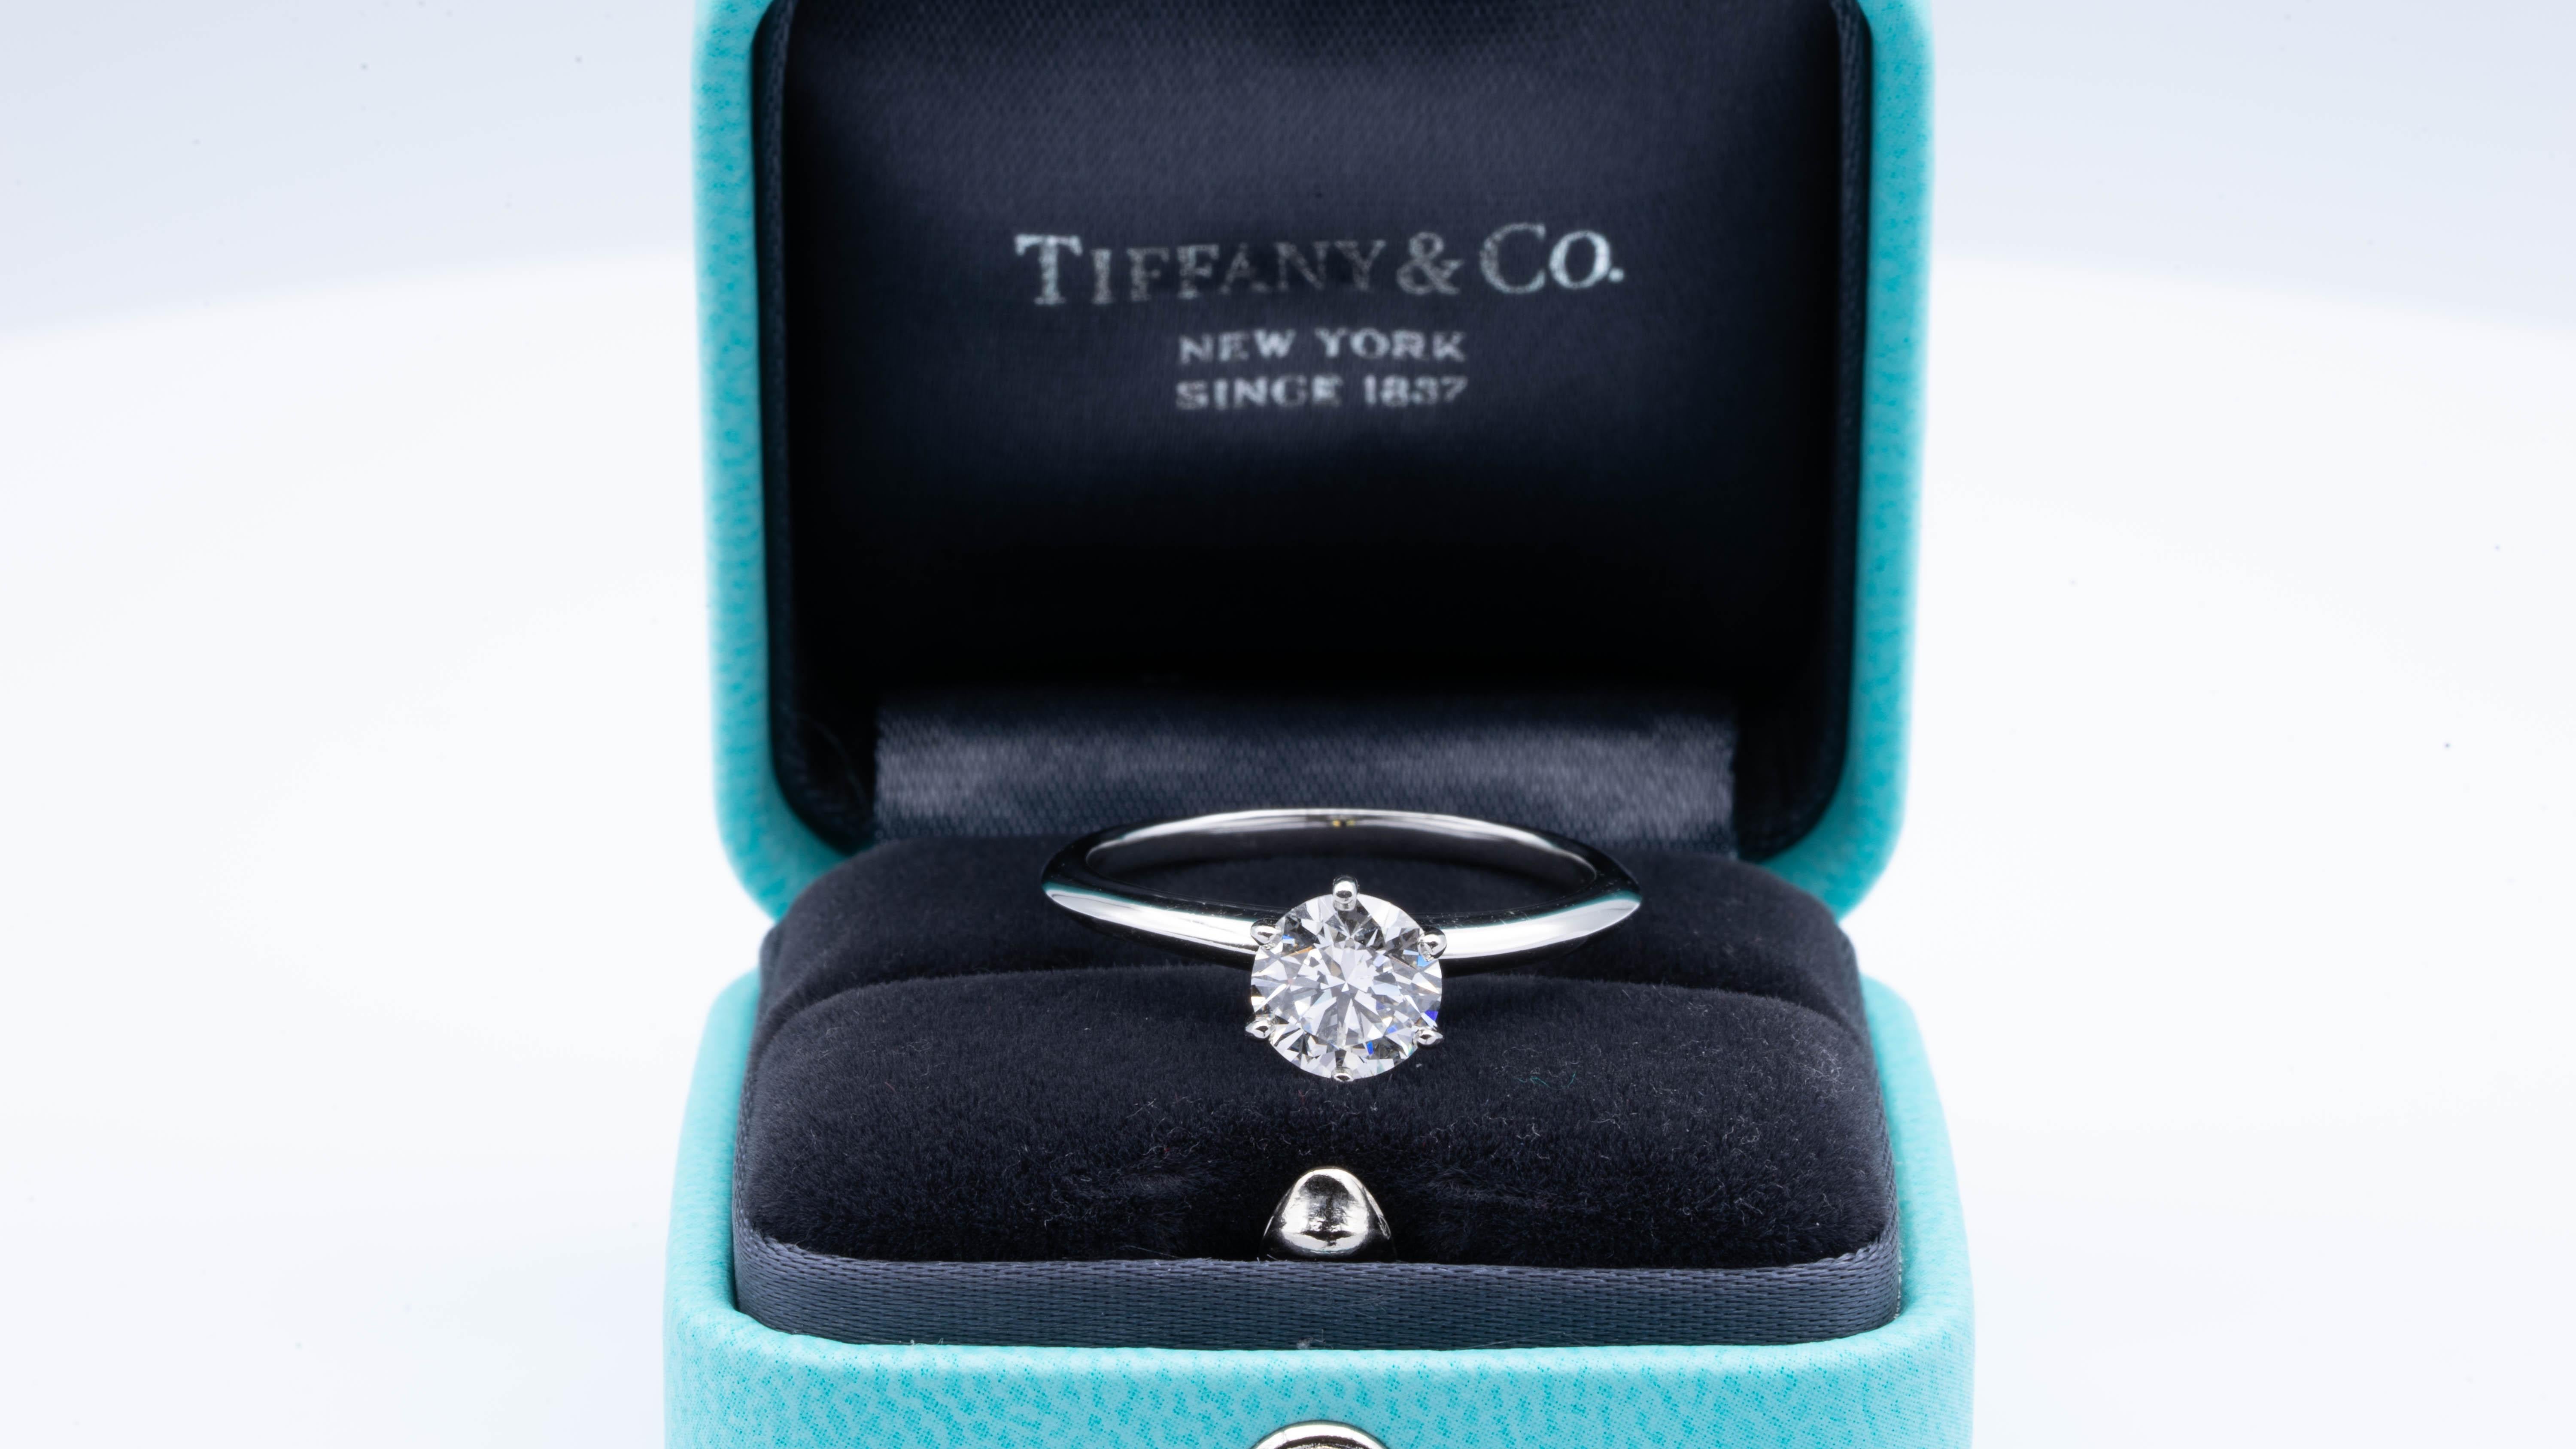 Tiffany & Co Round Brilliant Classic Solitaire Engagement Ring featuring a 1.26 ct Center I color, VVS2 clarity, finely crafted in a 6 prong Platinum Mounting. 
( Current Retail for $18,900)

Stamped: Tiffany & Co. PT 950 37967394, D 1.26 CT
Ring